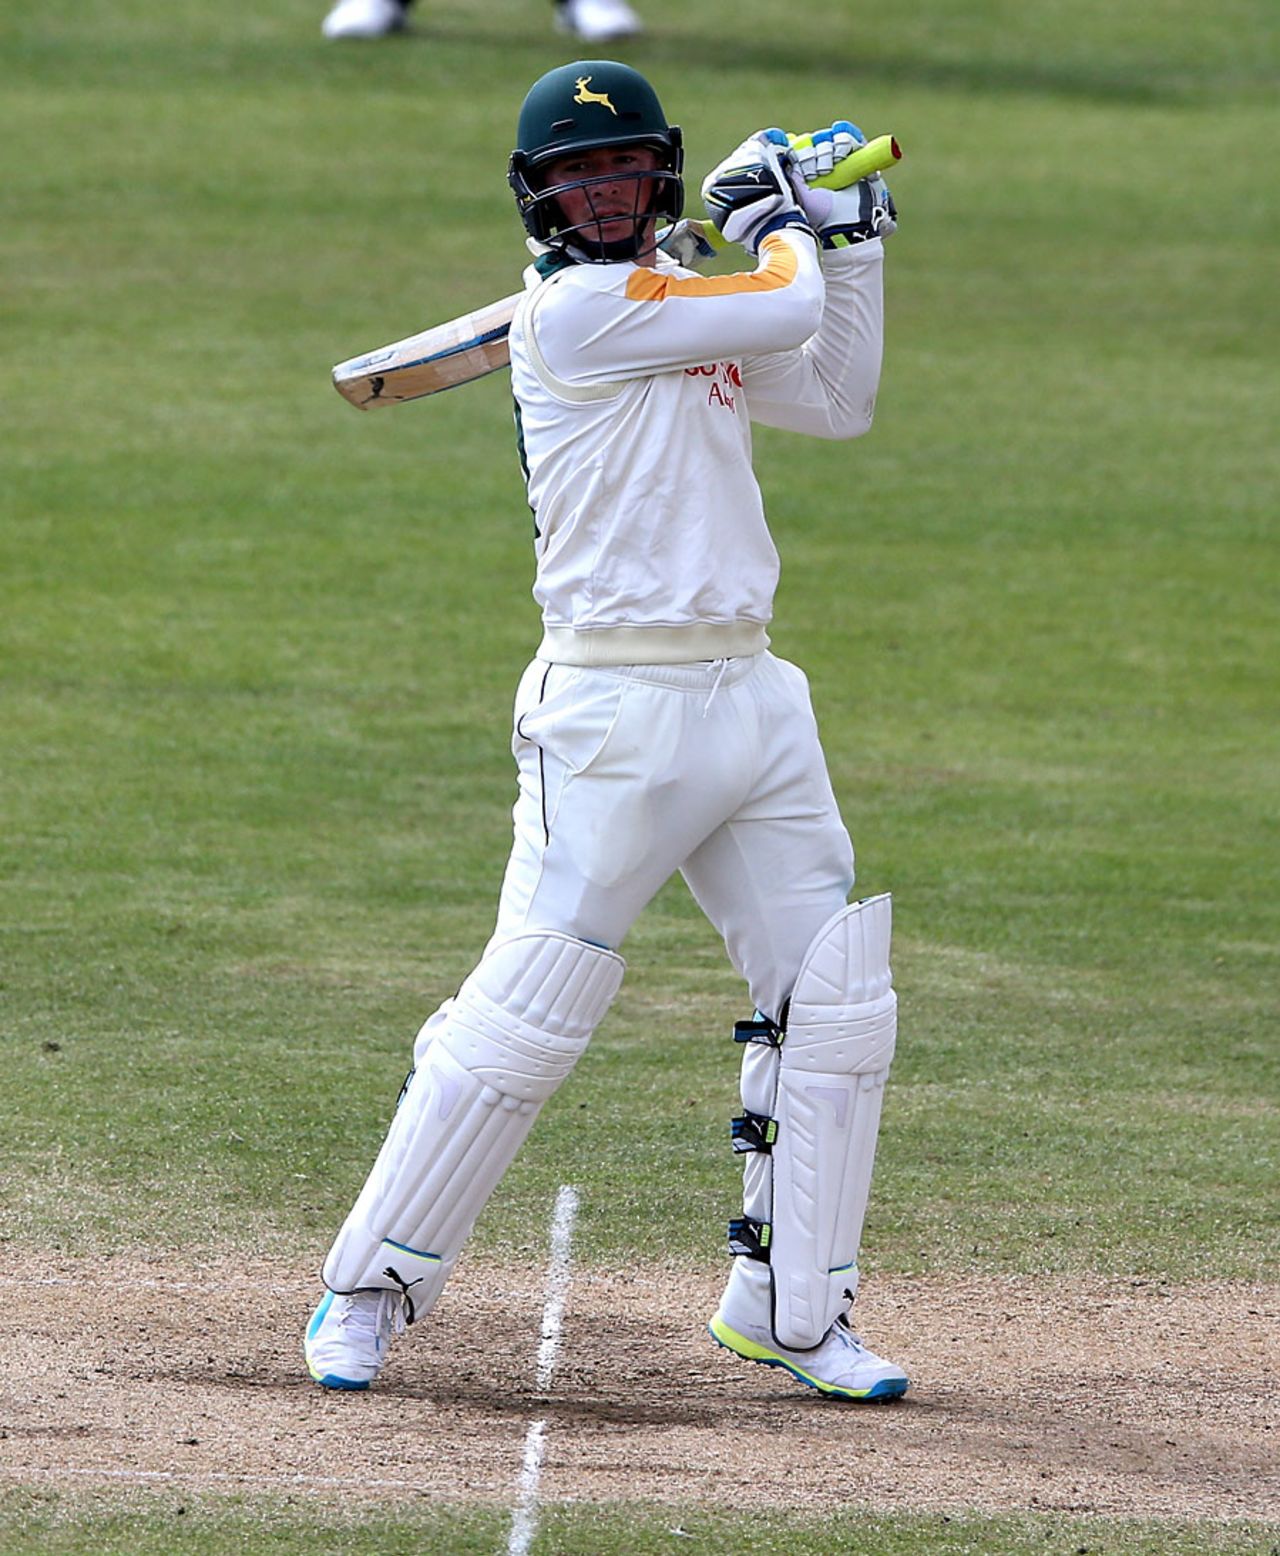 Greg Smith anchored Nottinghamshire's nervous chase, Nottinghamshire v Surrey, Specsavers County Championship, Division One, Trent Bridge, 4th day, April 13, 2016